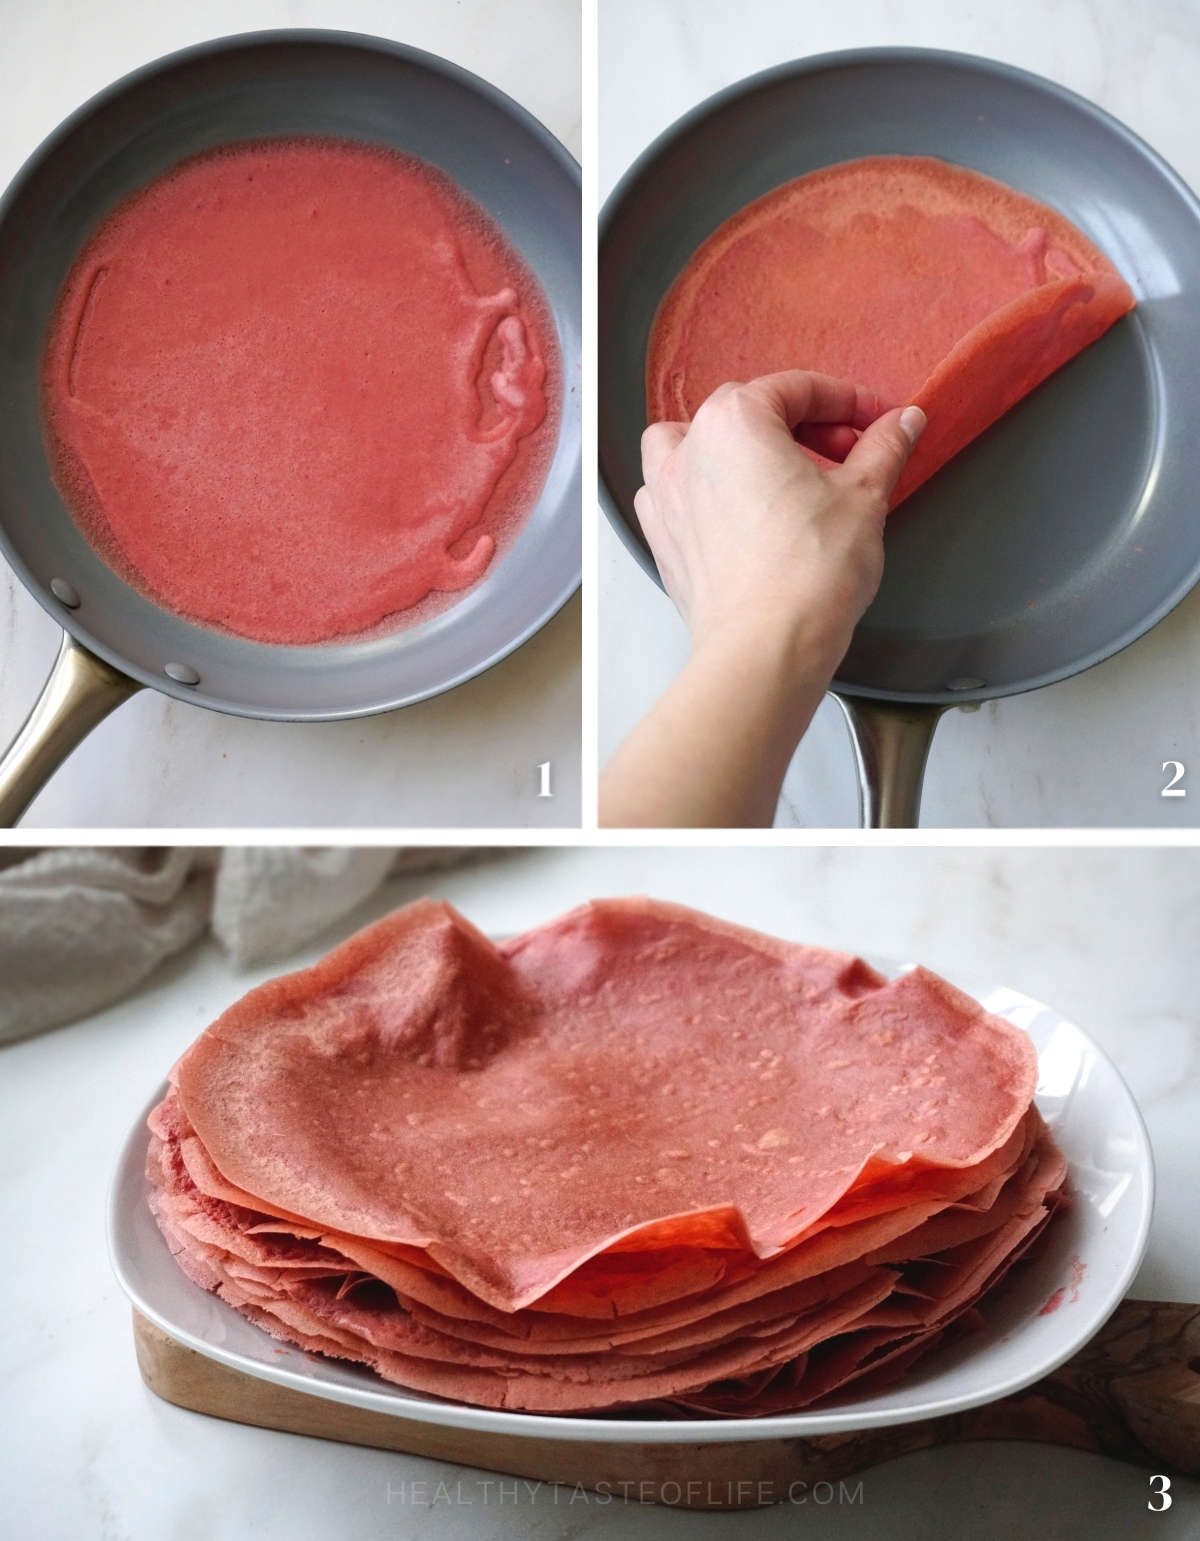 Process shots showing how to cook crepes for strawberry crepe cake recipe.